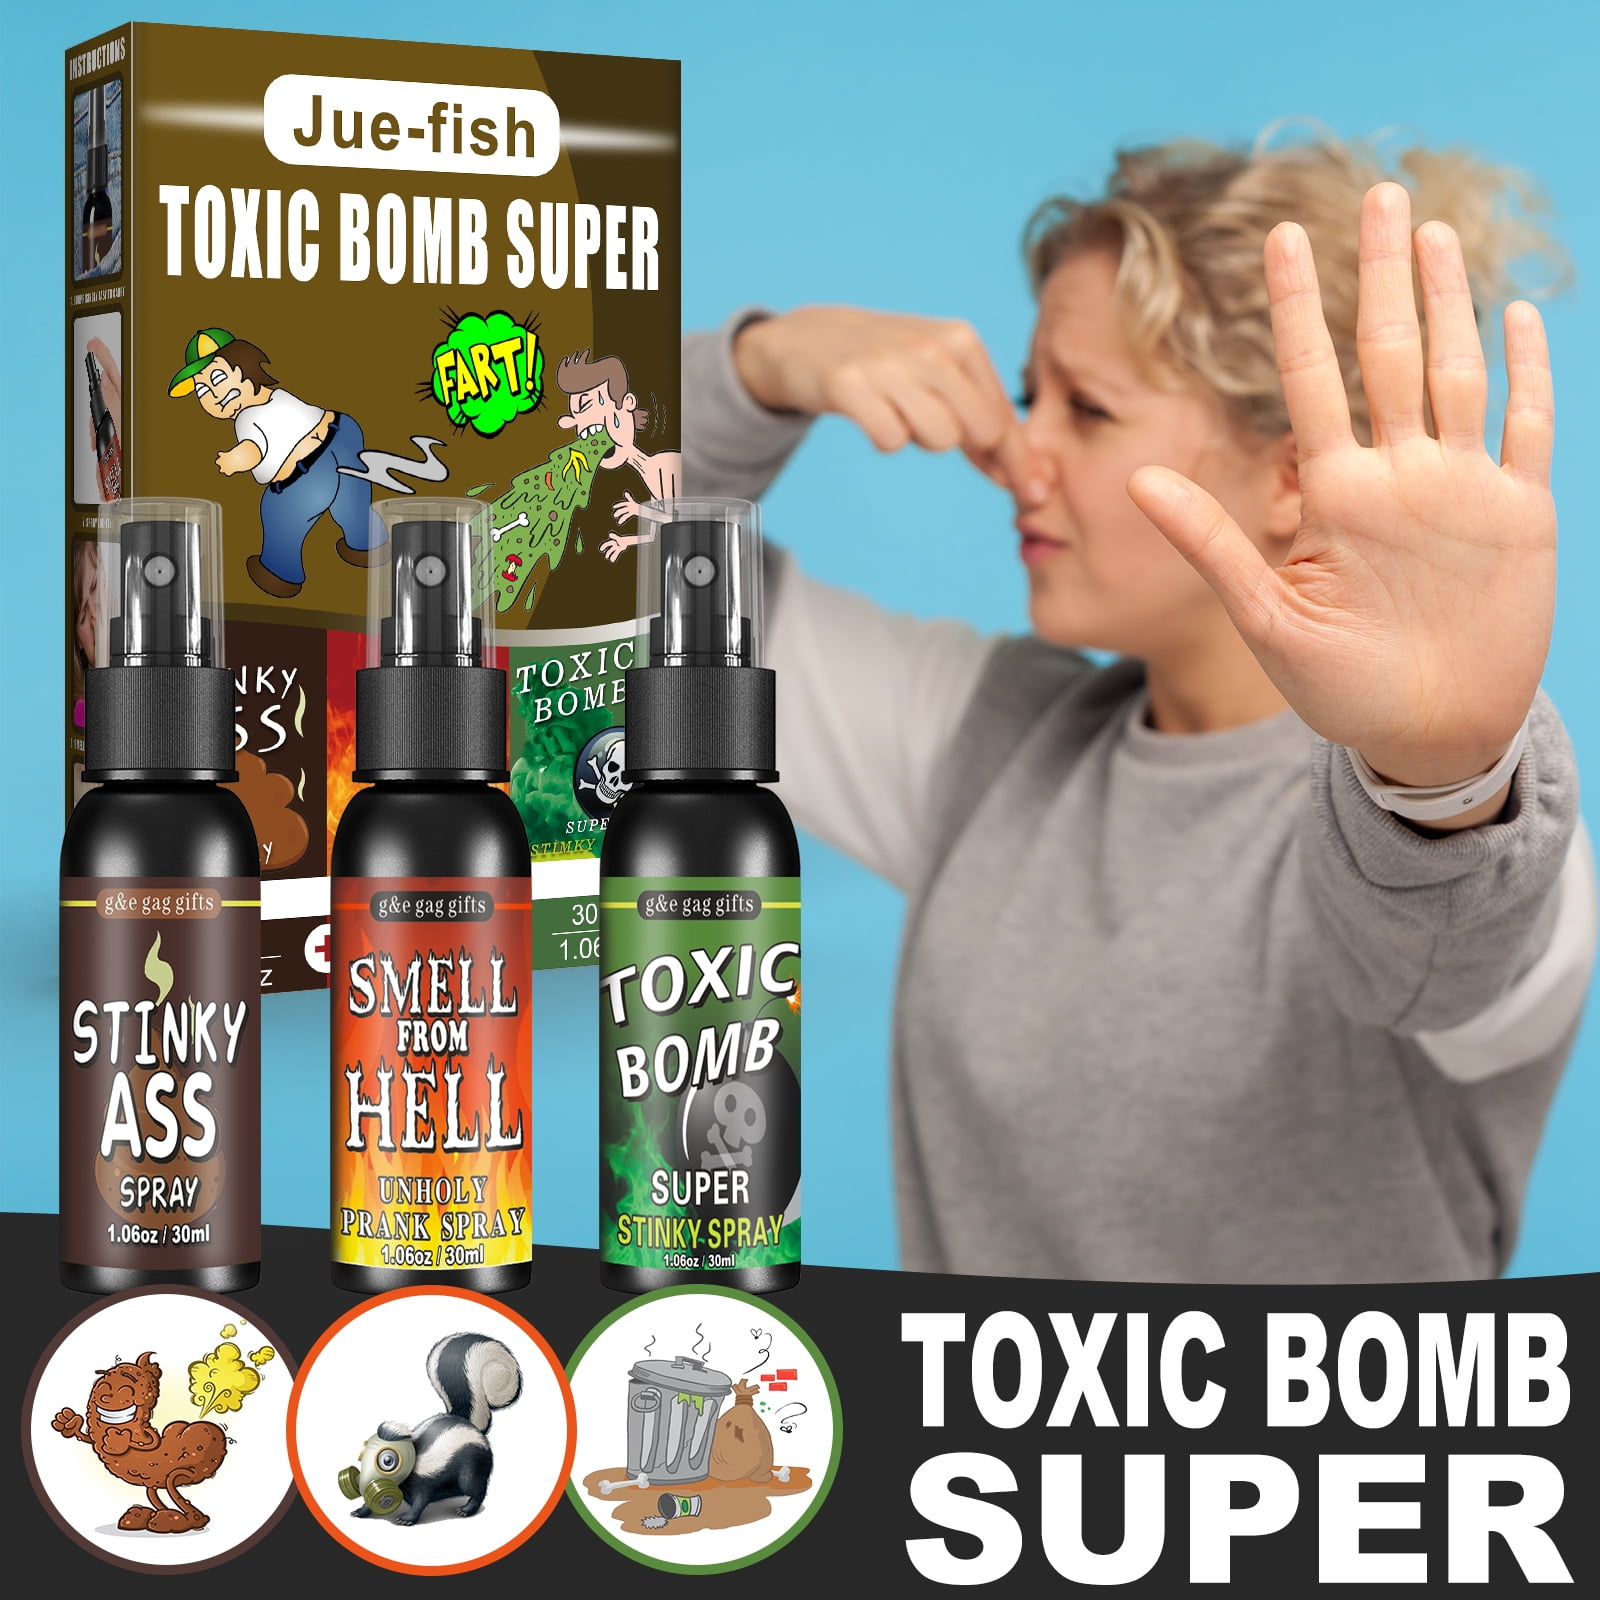 Stinky Ass Toxic Bomb Prank Fart Spray - 1 oz. Bottle - Nasty Fart Spray  That Smells Horrible - Made in The USA